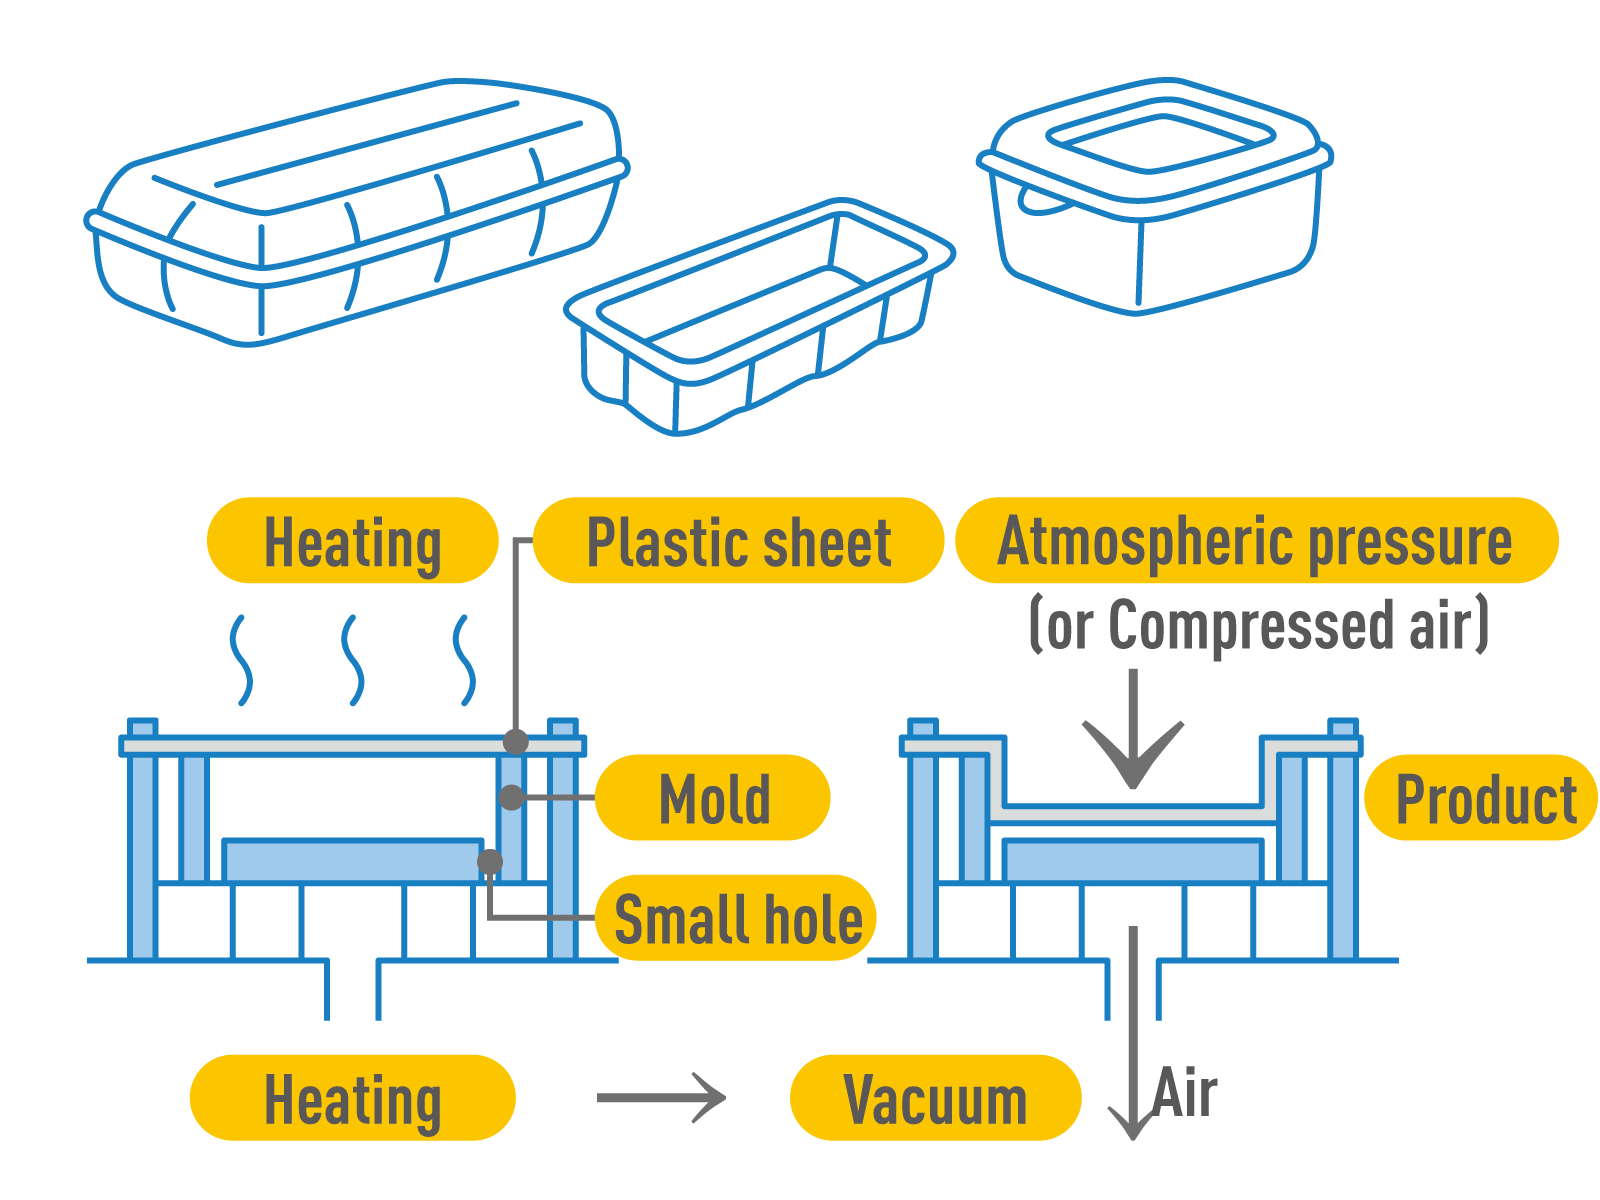 THERMAL MOLDING